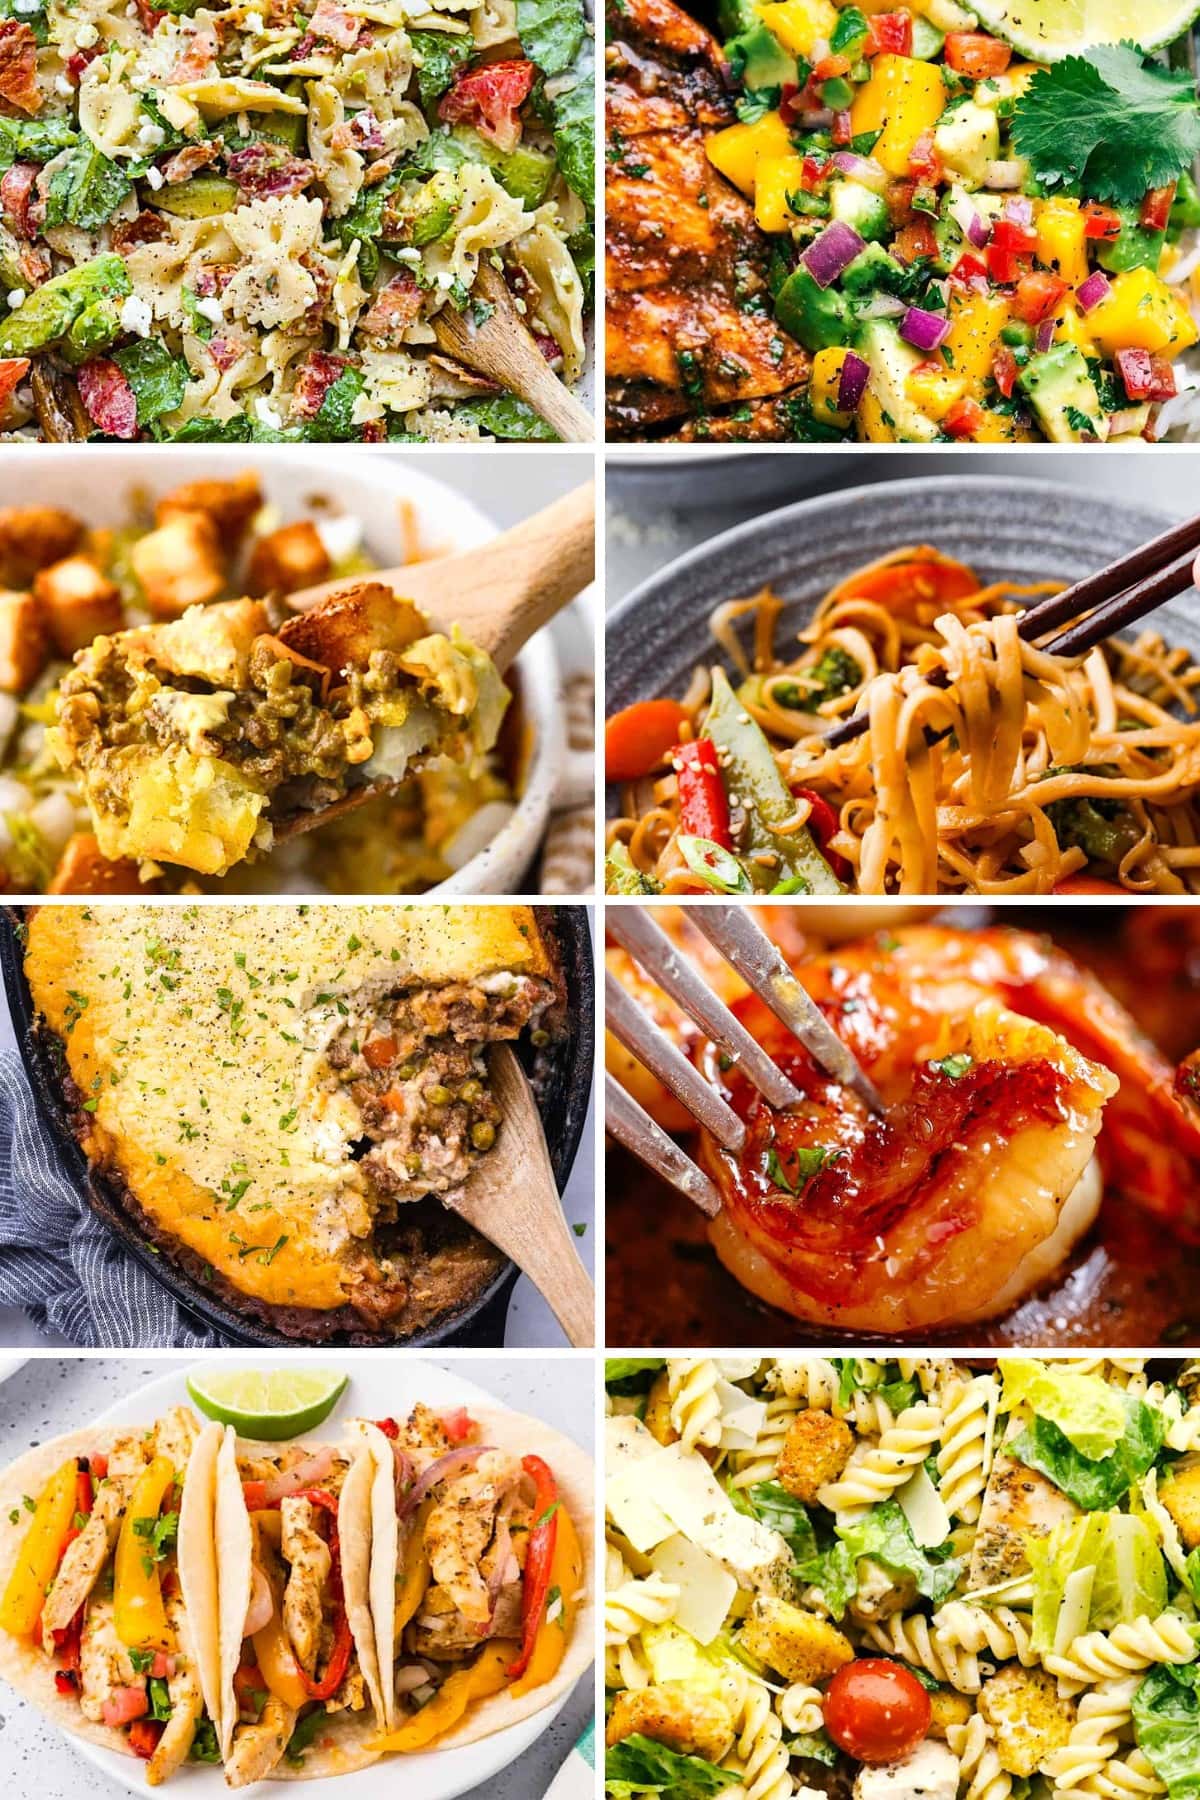 A collage of 8 easy dinner ideas: pasta salad, chicken with cilantro and mango, a wooden spoon lifting big mac casserole, chopsticks with asian noodles, shepherd pie, shrimp, chicken fajitas and blt caesar salad.